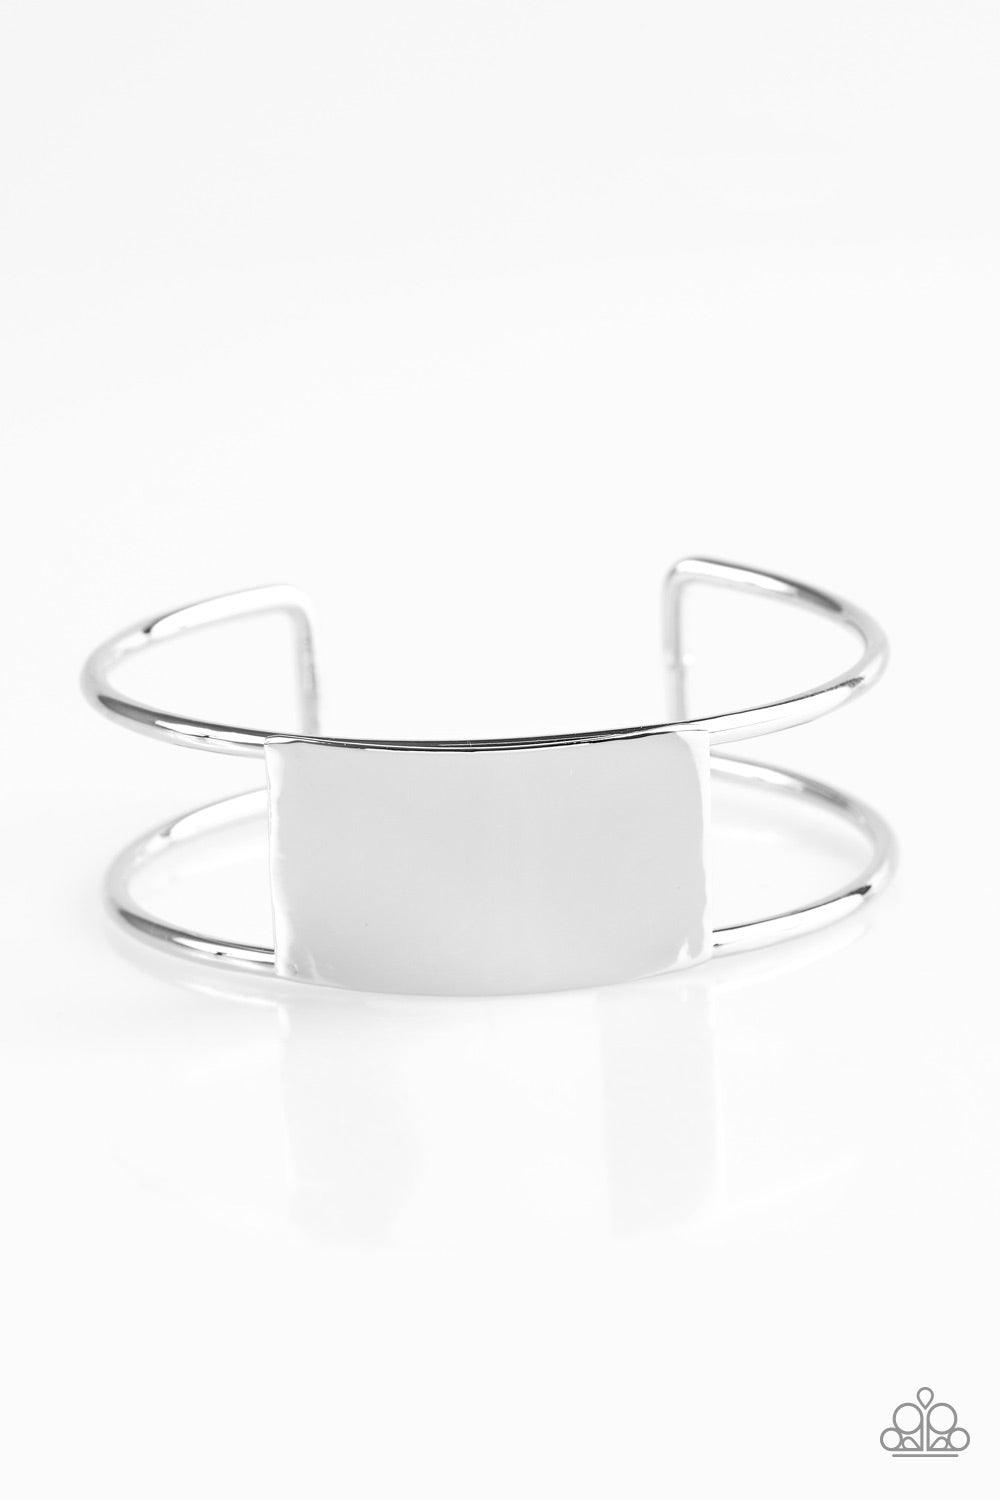 Paparazzi Accessories Set The SHEEN - Silver Glistening silver bars curl around the wrist, creating an airy cuff. Brushed in a high sheen finish, a shimmering silver frame adorns the center of the cuff for an edgy finish. Jewelry